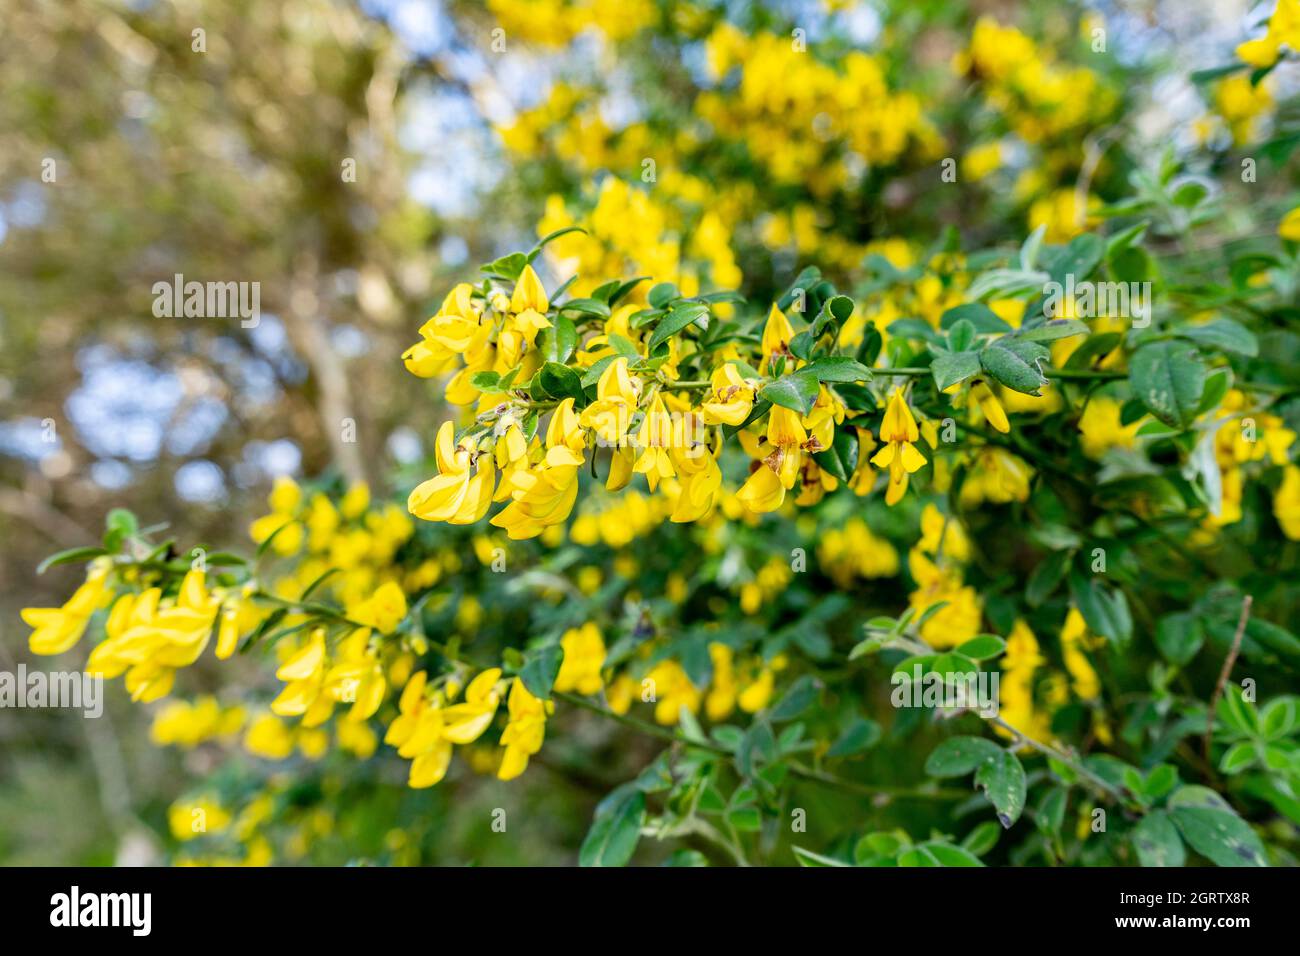 Close up of a flowered branch of Genisteae with yellow flowers, in the countryside of Campiglia Marittima, Tuscany, Italy. Stock Photo